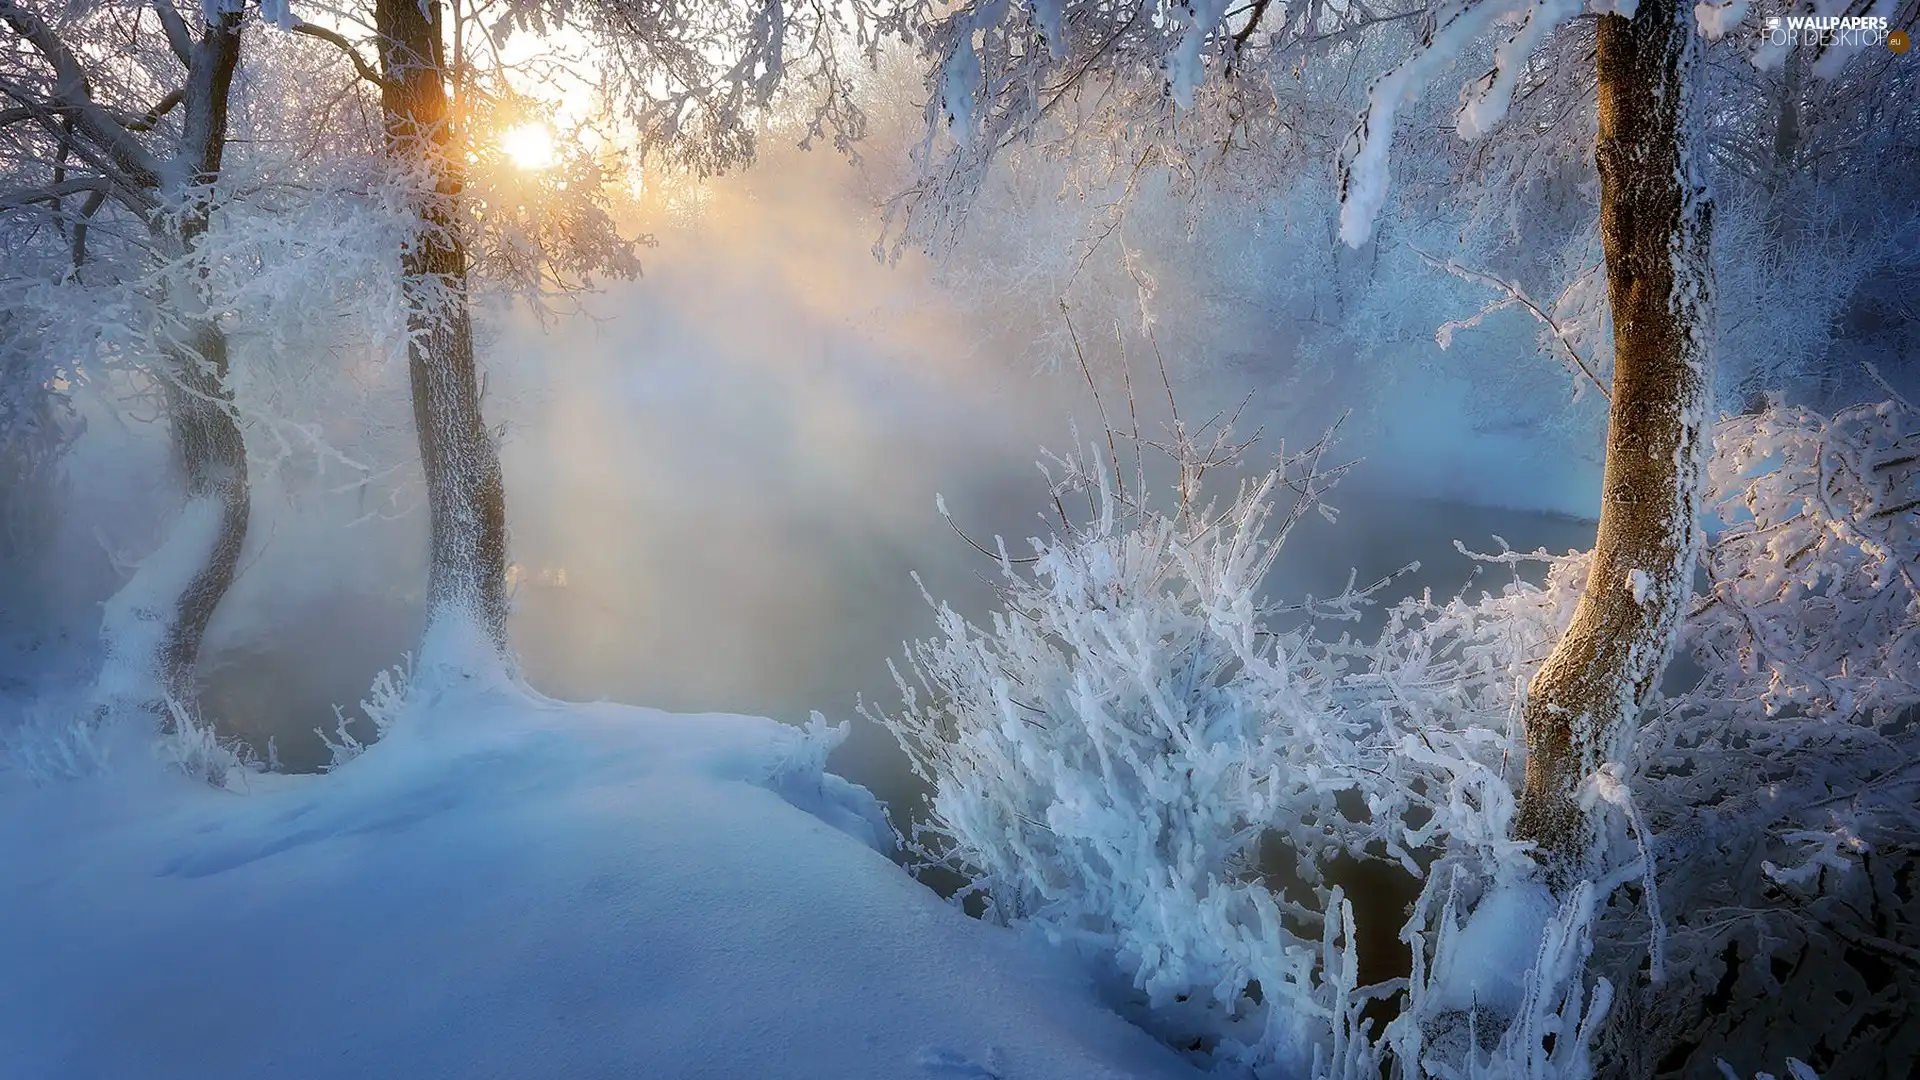 viewes, Bush, rays of the Sun, snow, Fog, trees, winter, River